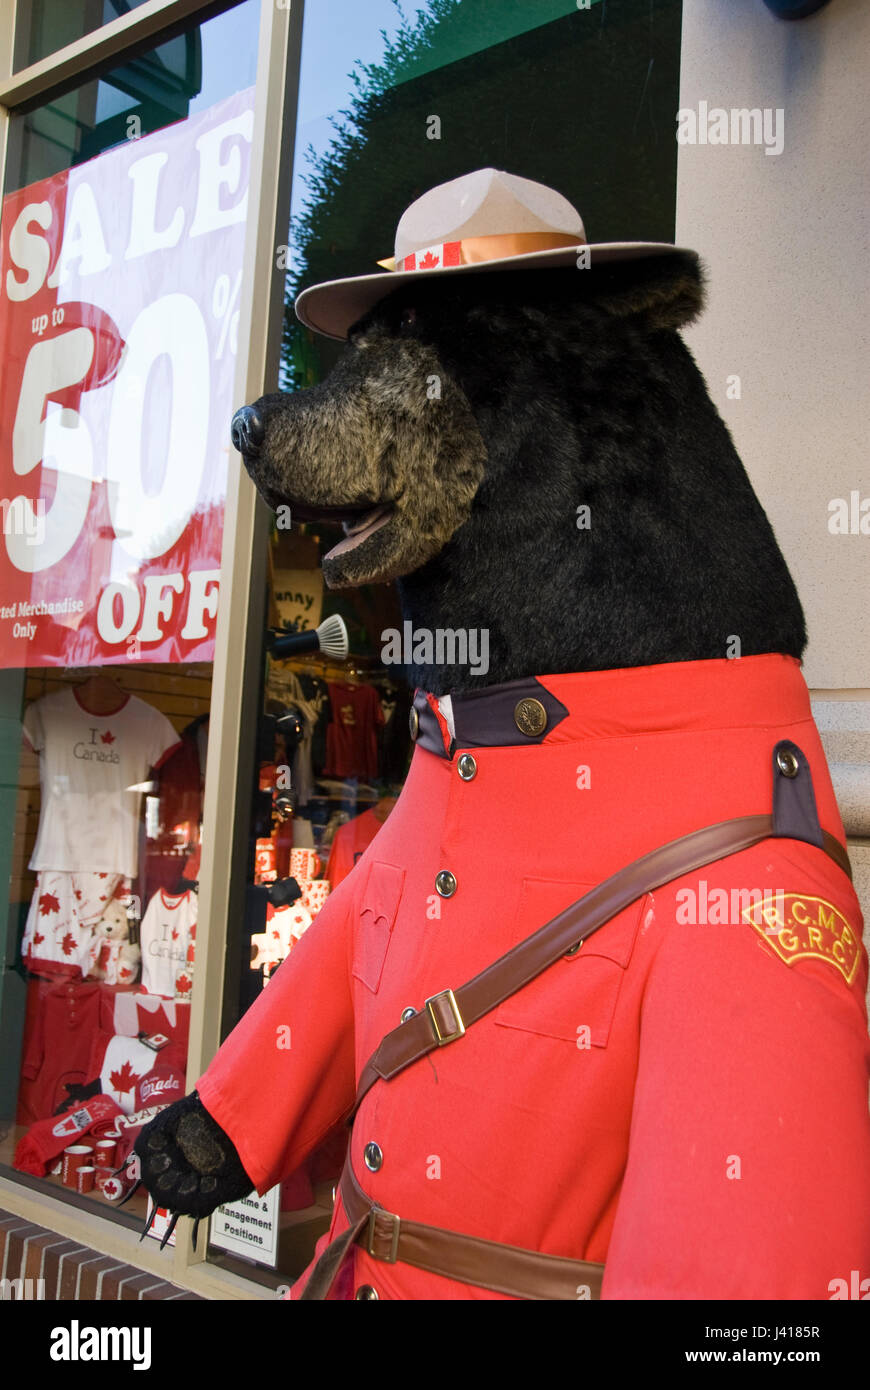 A large stuffed bear wears a Mountie uniform at a tourist shop on Store Street, Victoria, British Columbia, Canada. Stock Photo